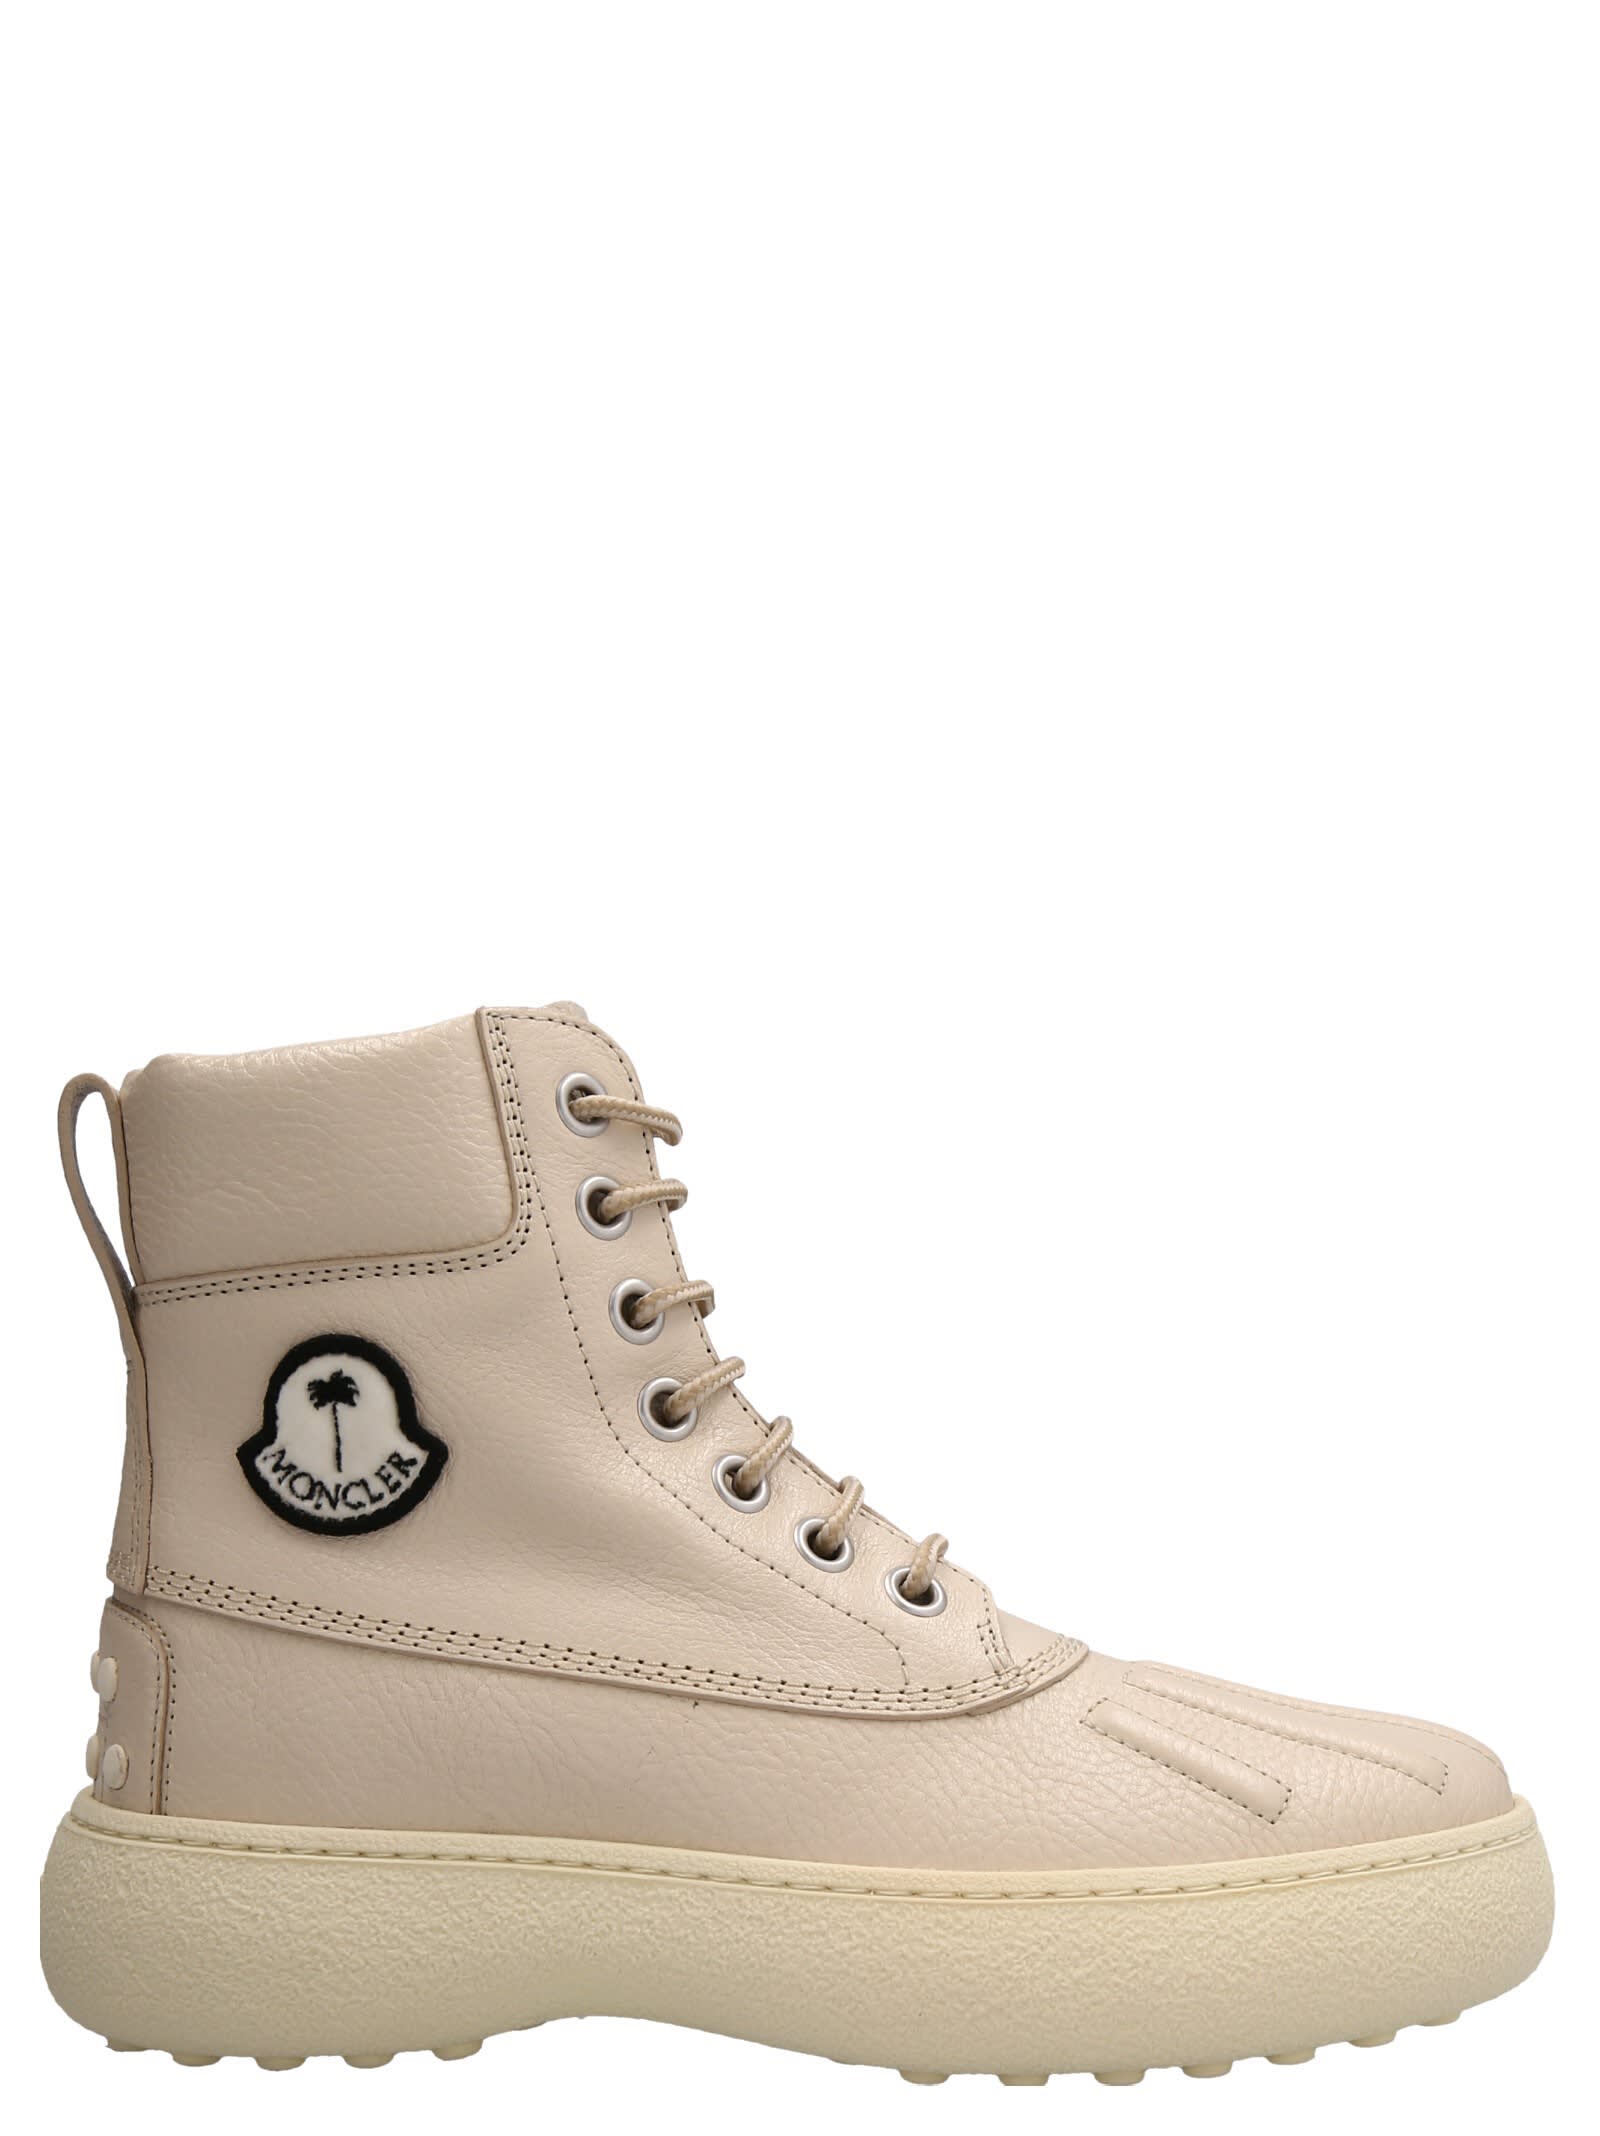 MONCLER GENIUS ANKLE BOOT WINTER GOMMINO MID MONCLER GENIUS X PALM ANGELS X TODS